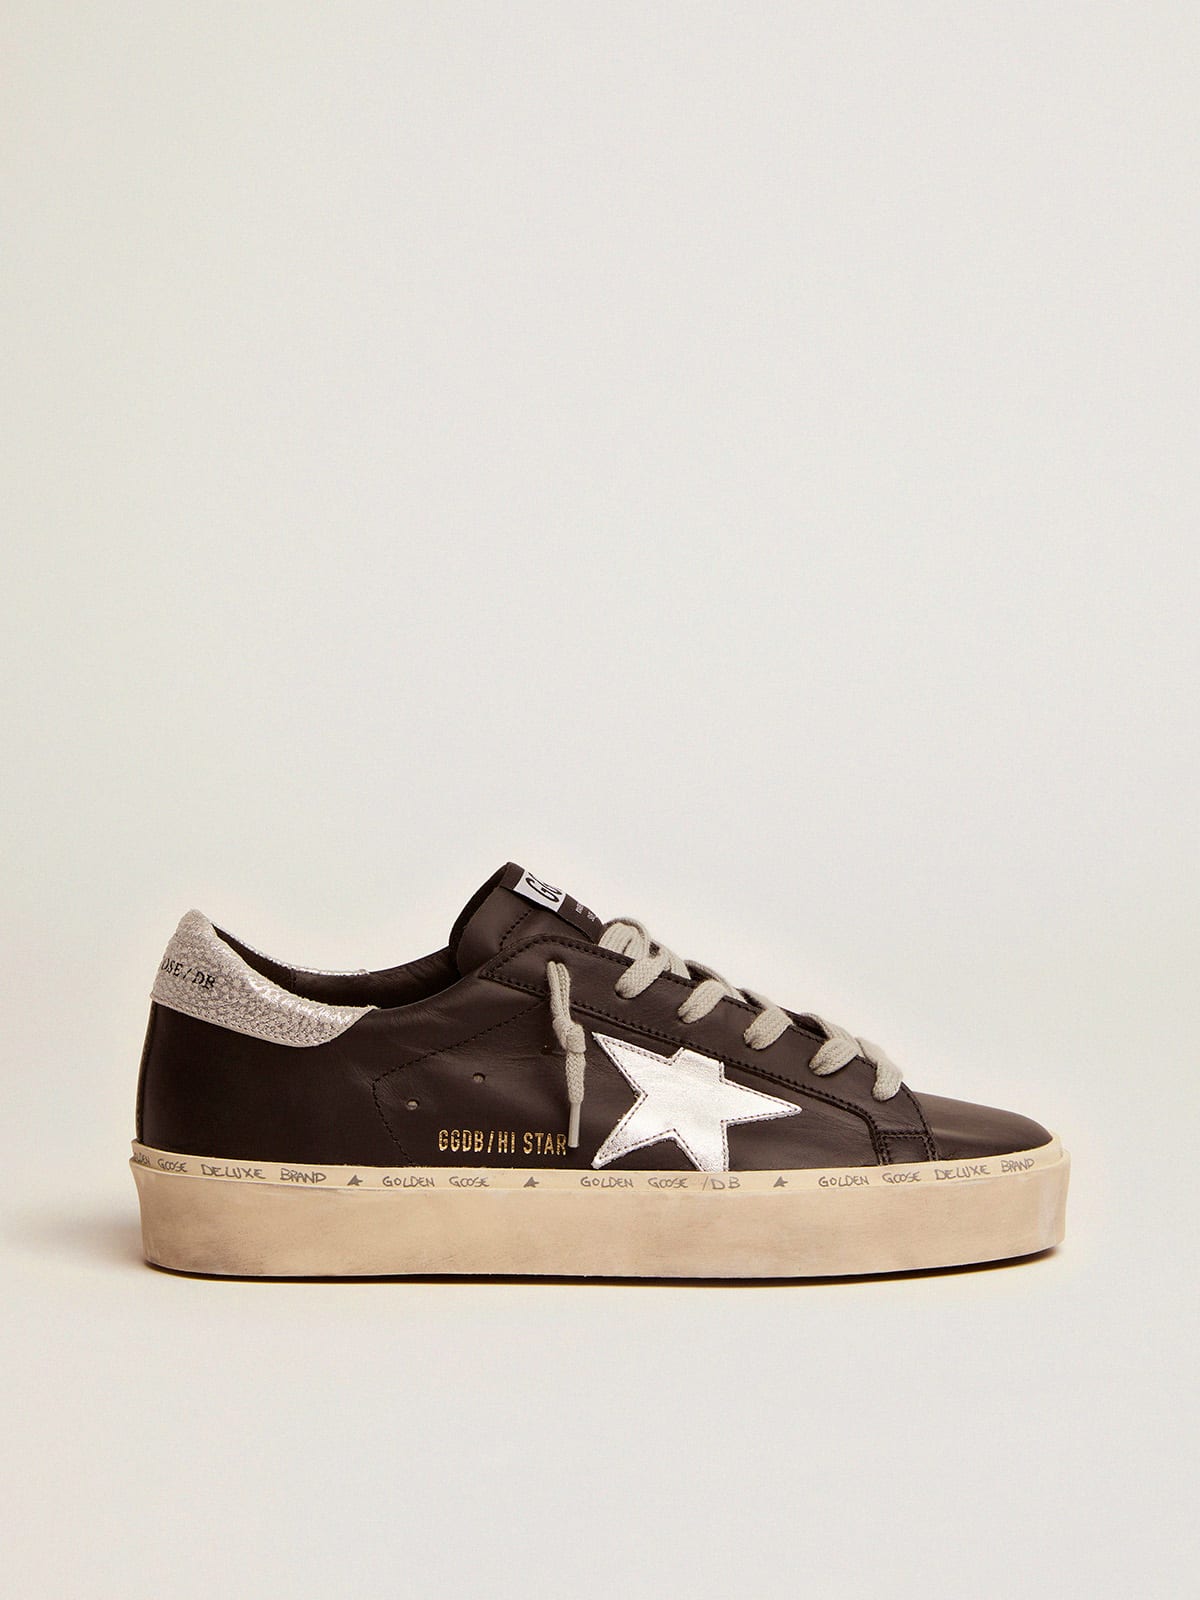 Golden Goose - Women's Hi Star in black leather with silver laminated leather star in 